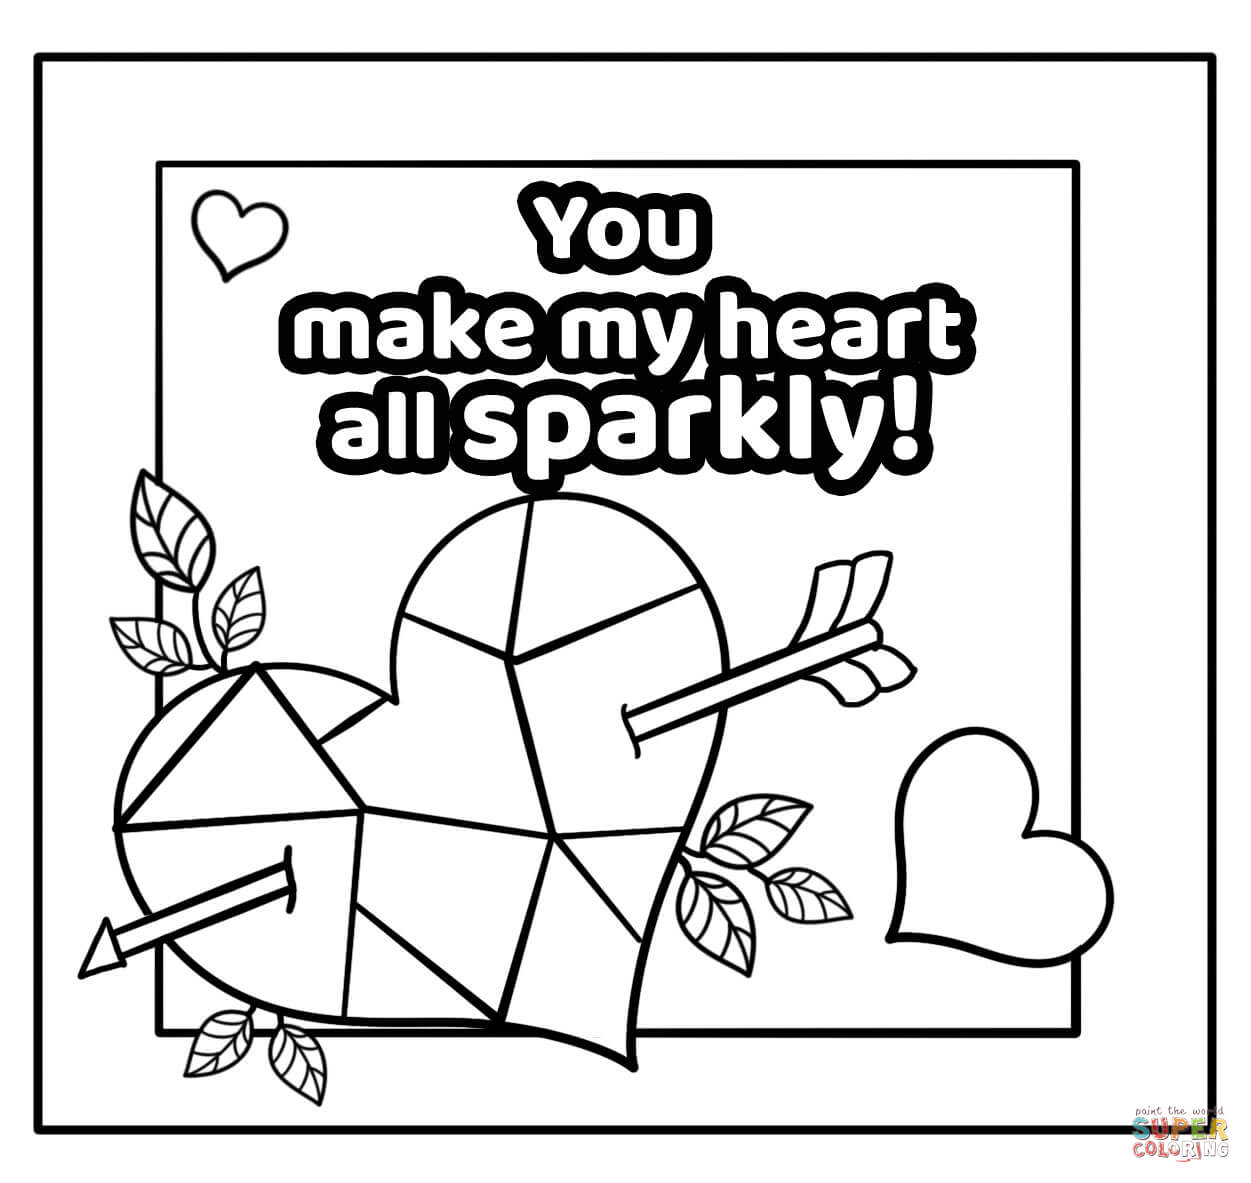 You Make My Heart All Sparkly - Encouraging Valentine Note coloring page |  Free Printable Coloring Pages